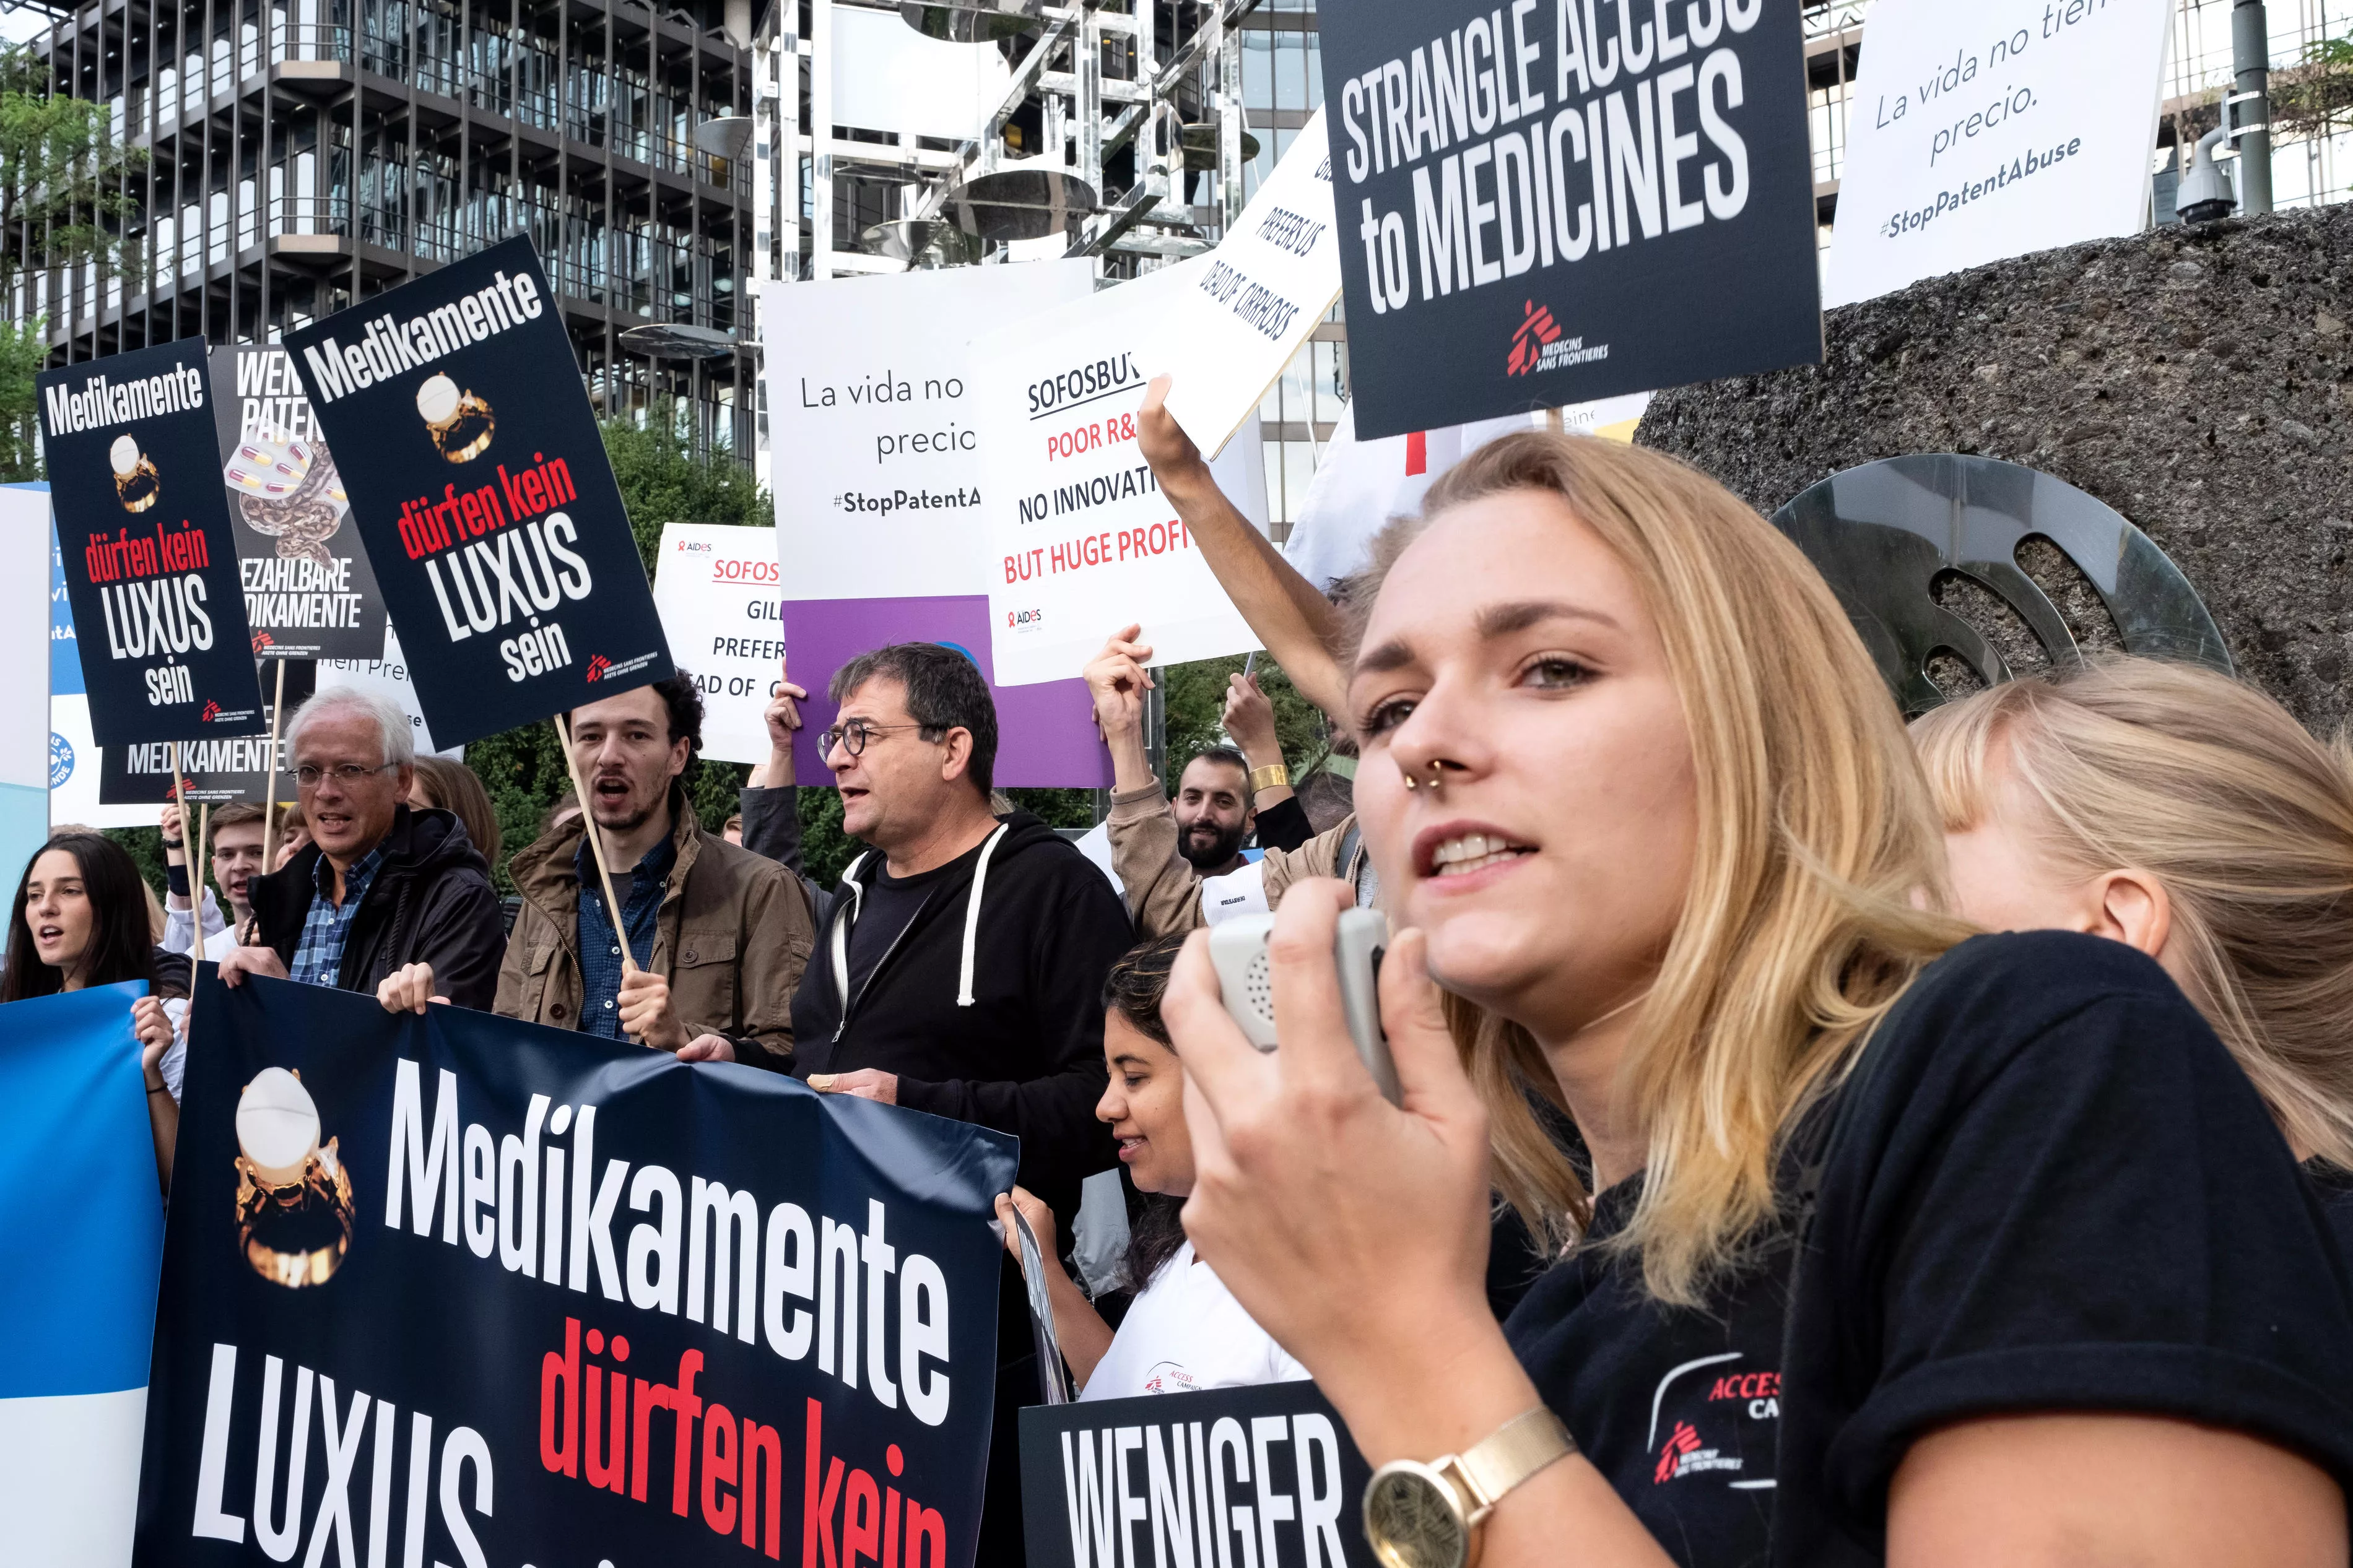 In March 2017, organisations from 17 European countries filed an opposition to Gilead Science's patent on the highly effective hepatitis C drug sofosbuvir. On 13th and 14th of September 2018, the hearing took e place before the European Patent Office in Munich.